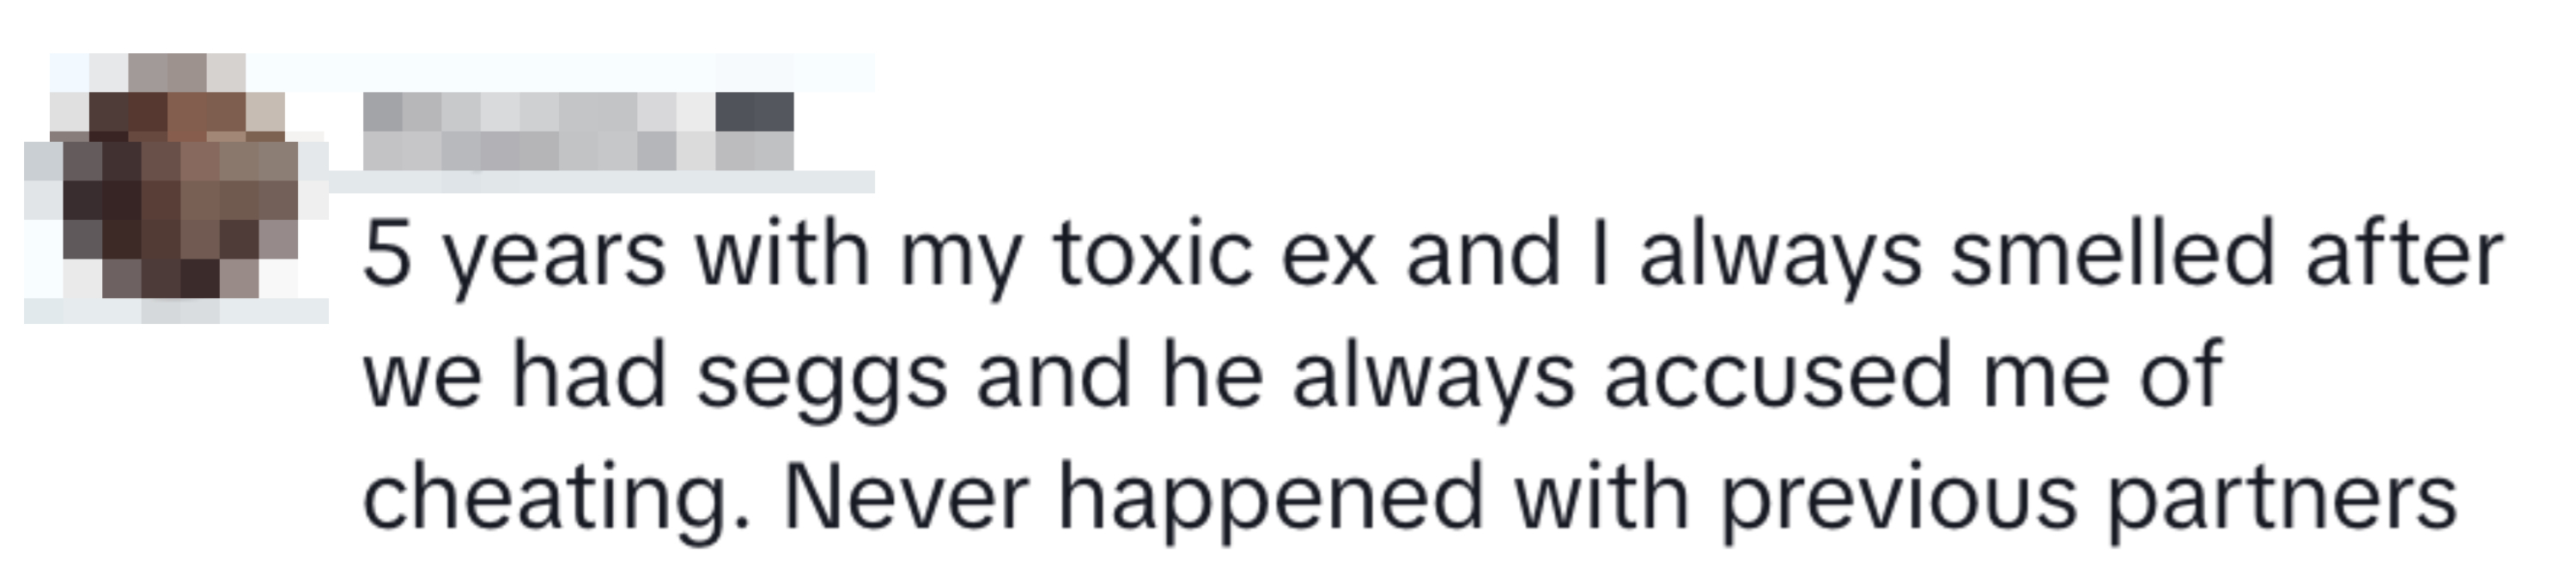 A post post reads, &quot;5 years with my toxic ex and I always smelled after we had seggs and he always accused me of cheating. Never happened with previous partners&quot;